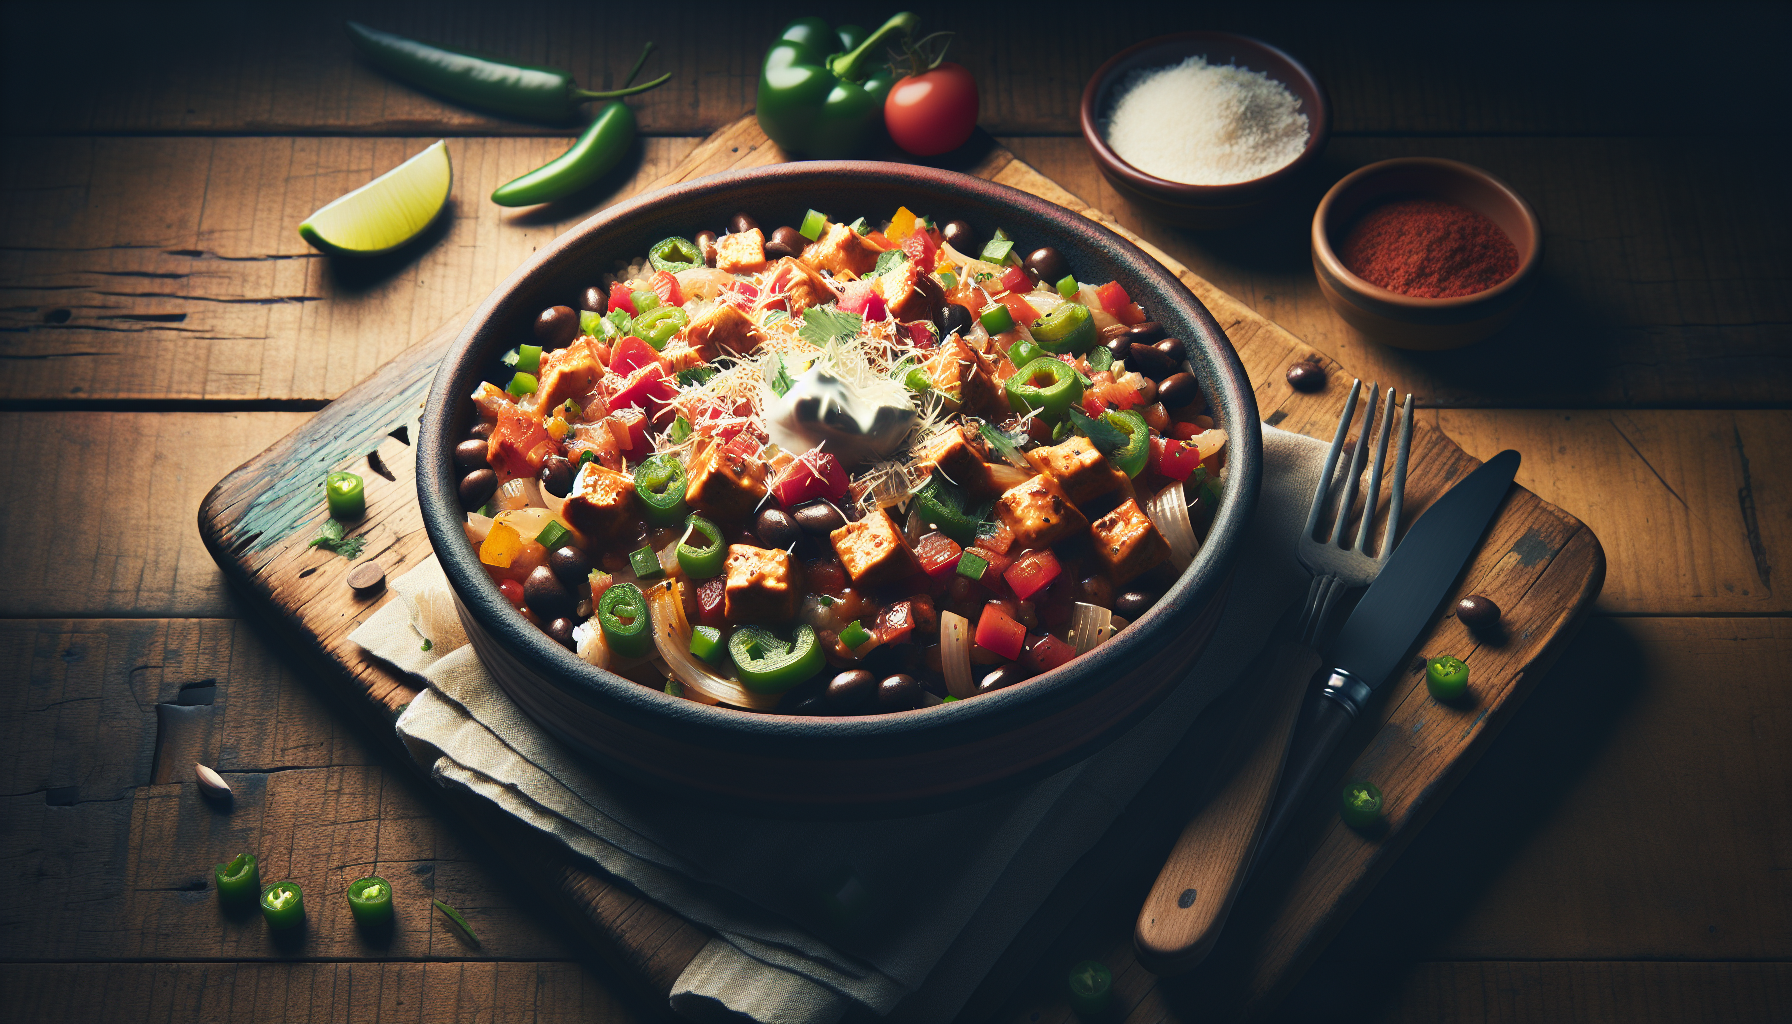 Share Your 15-minute Mexican Dish Thats Perfect For Busy Weeknights.